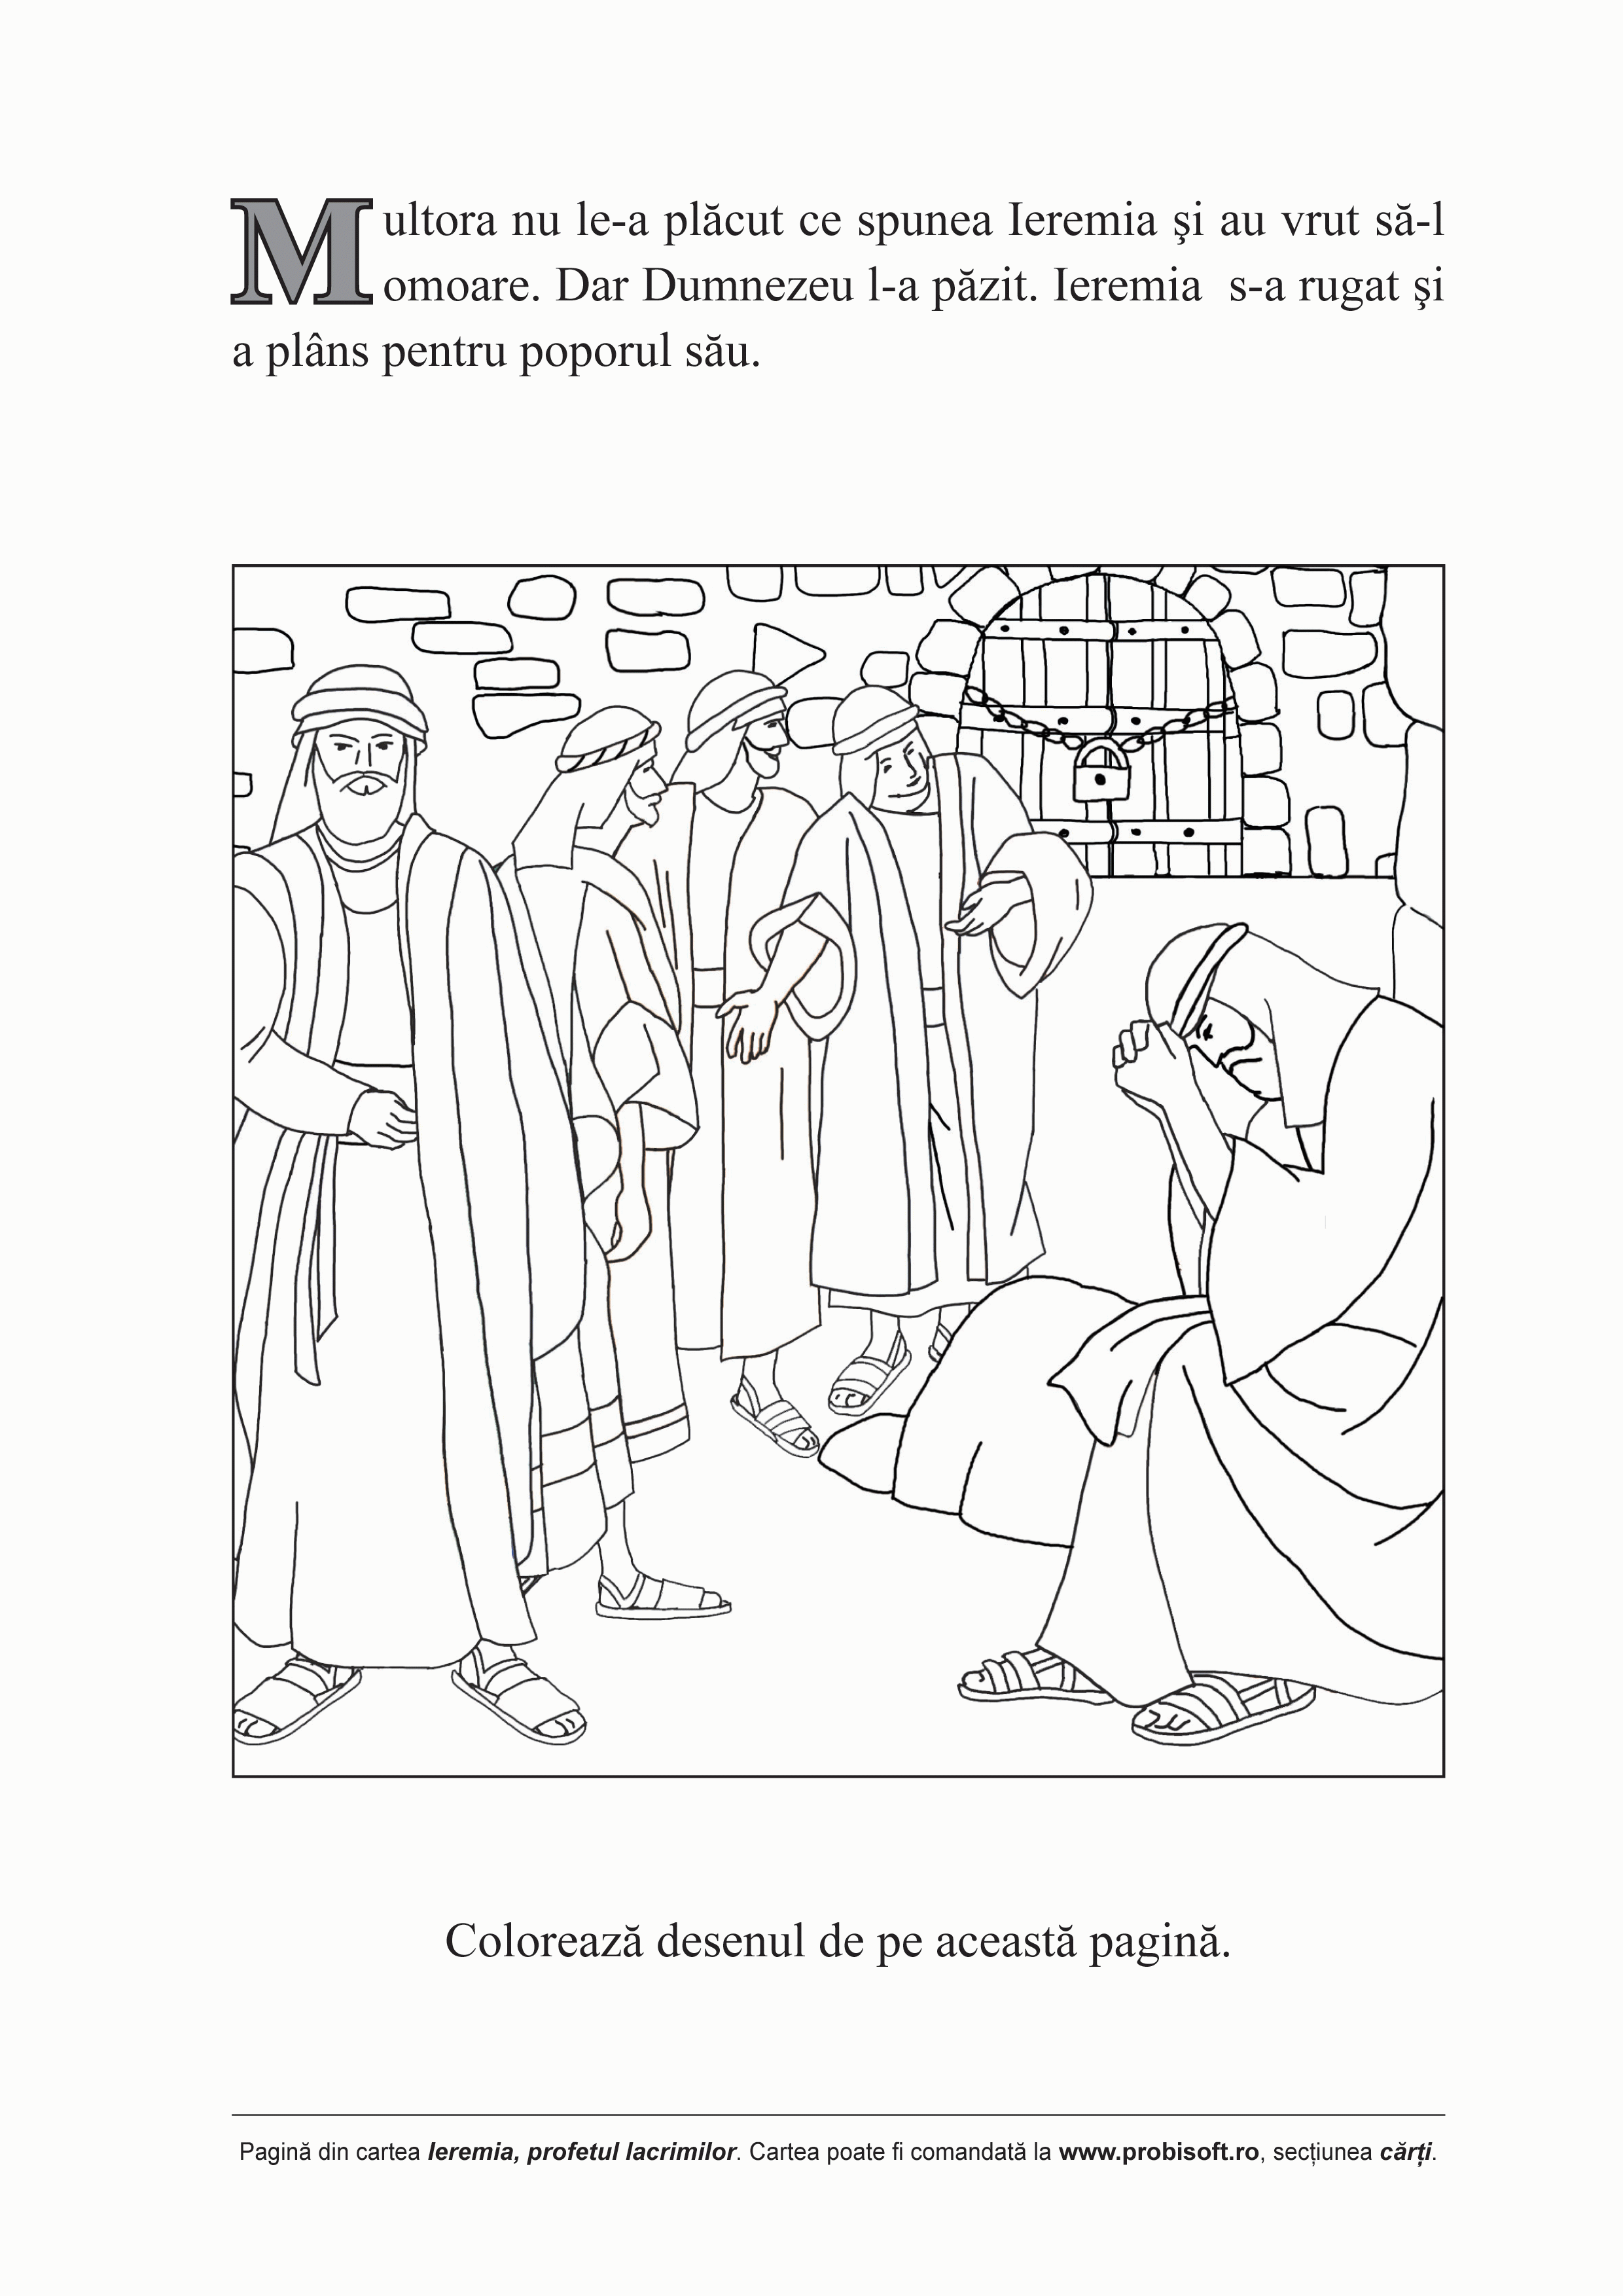 minor-prophets-coloring-pages